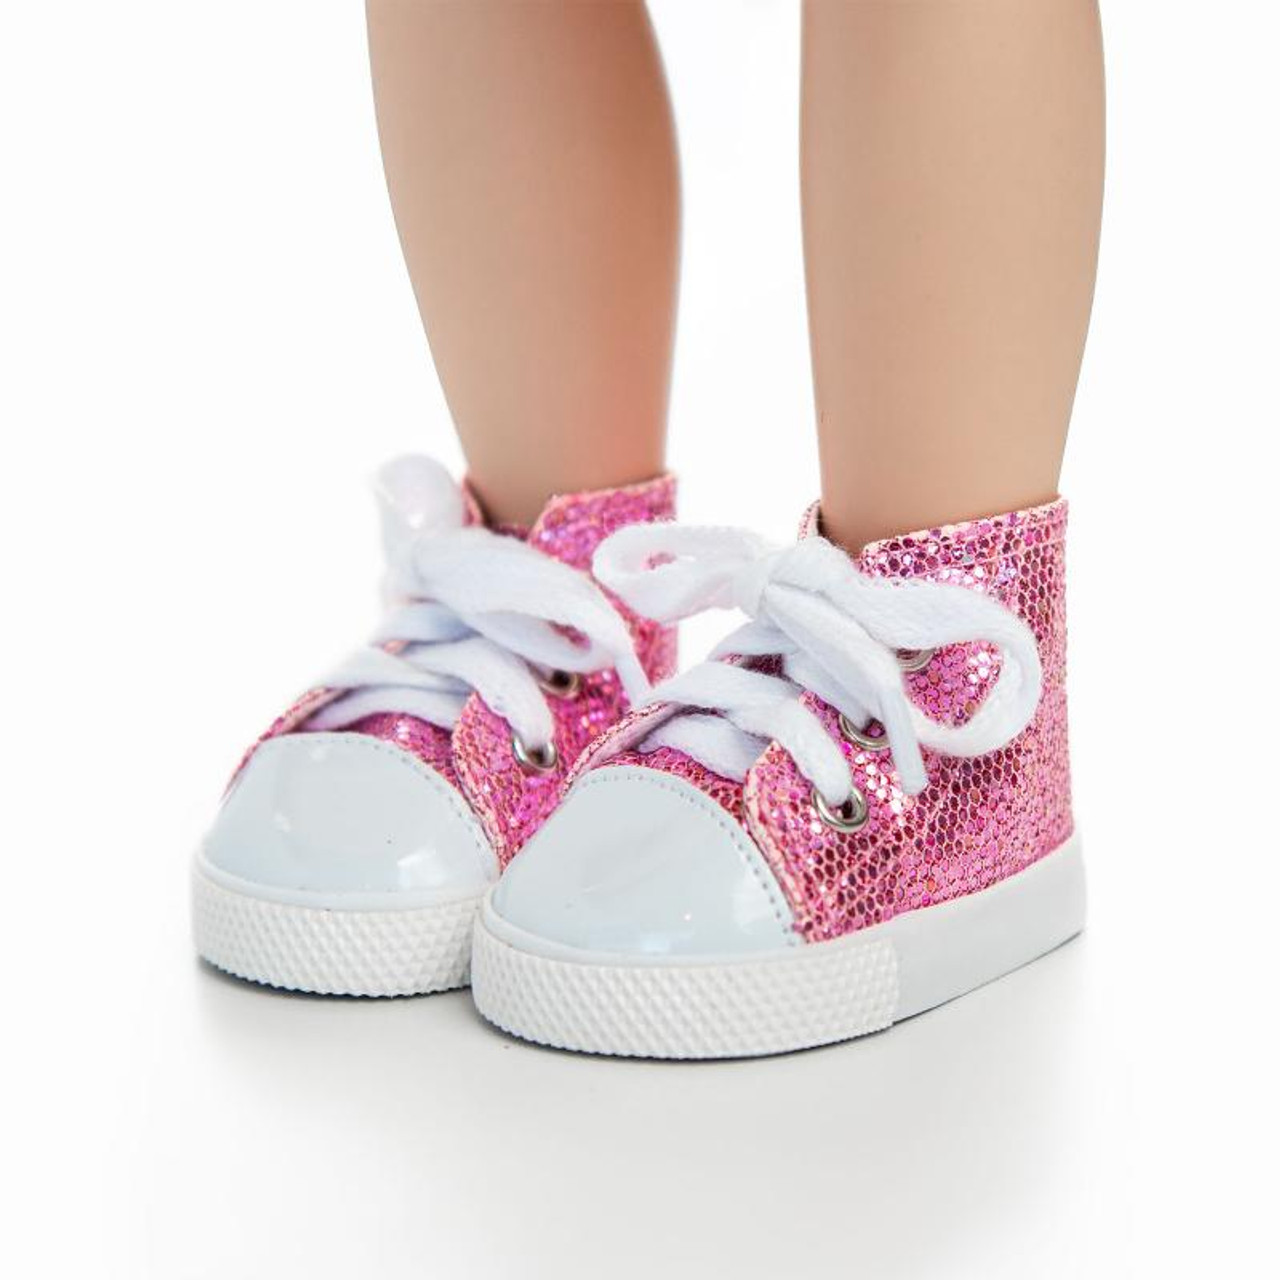 Sparkly Pink High-top Sneakers and Shoe Box for 18 Inch Dolls